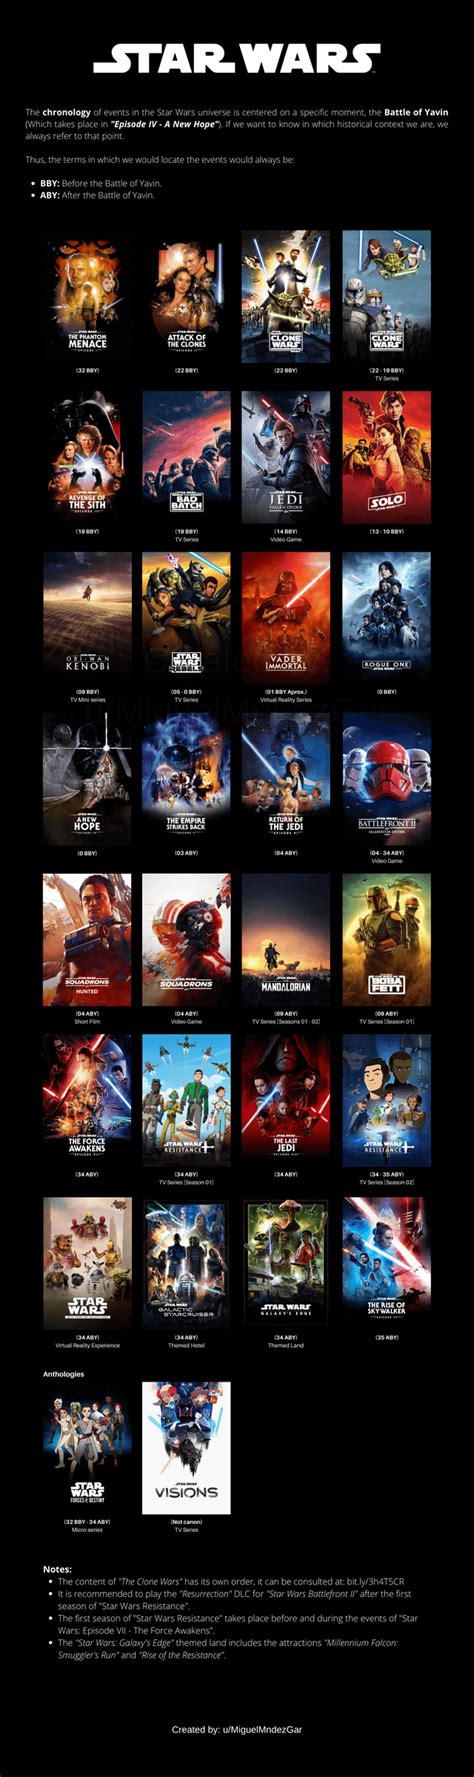 Oc Updated Star Wars Canon Timeline Movies Tv Series And Video